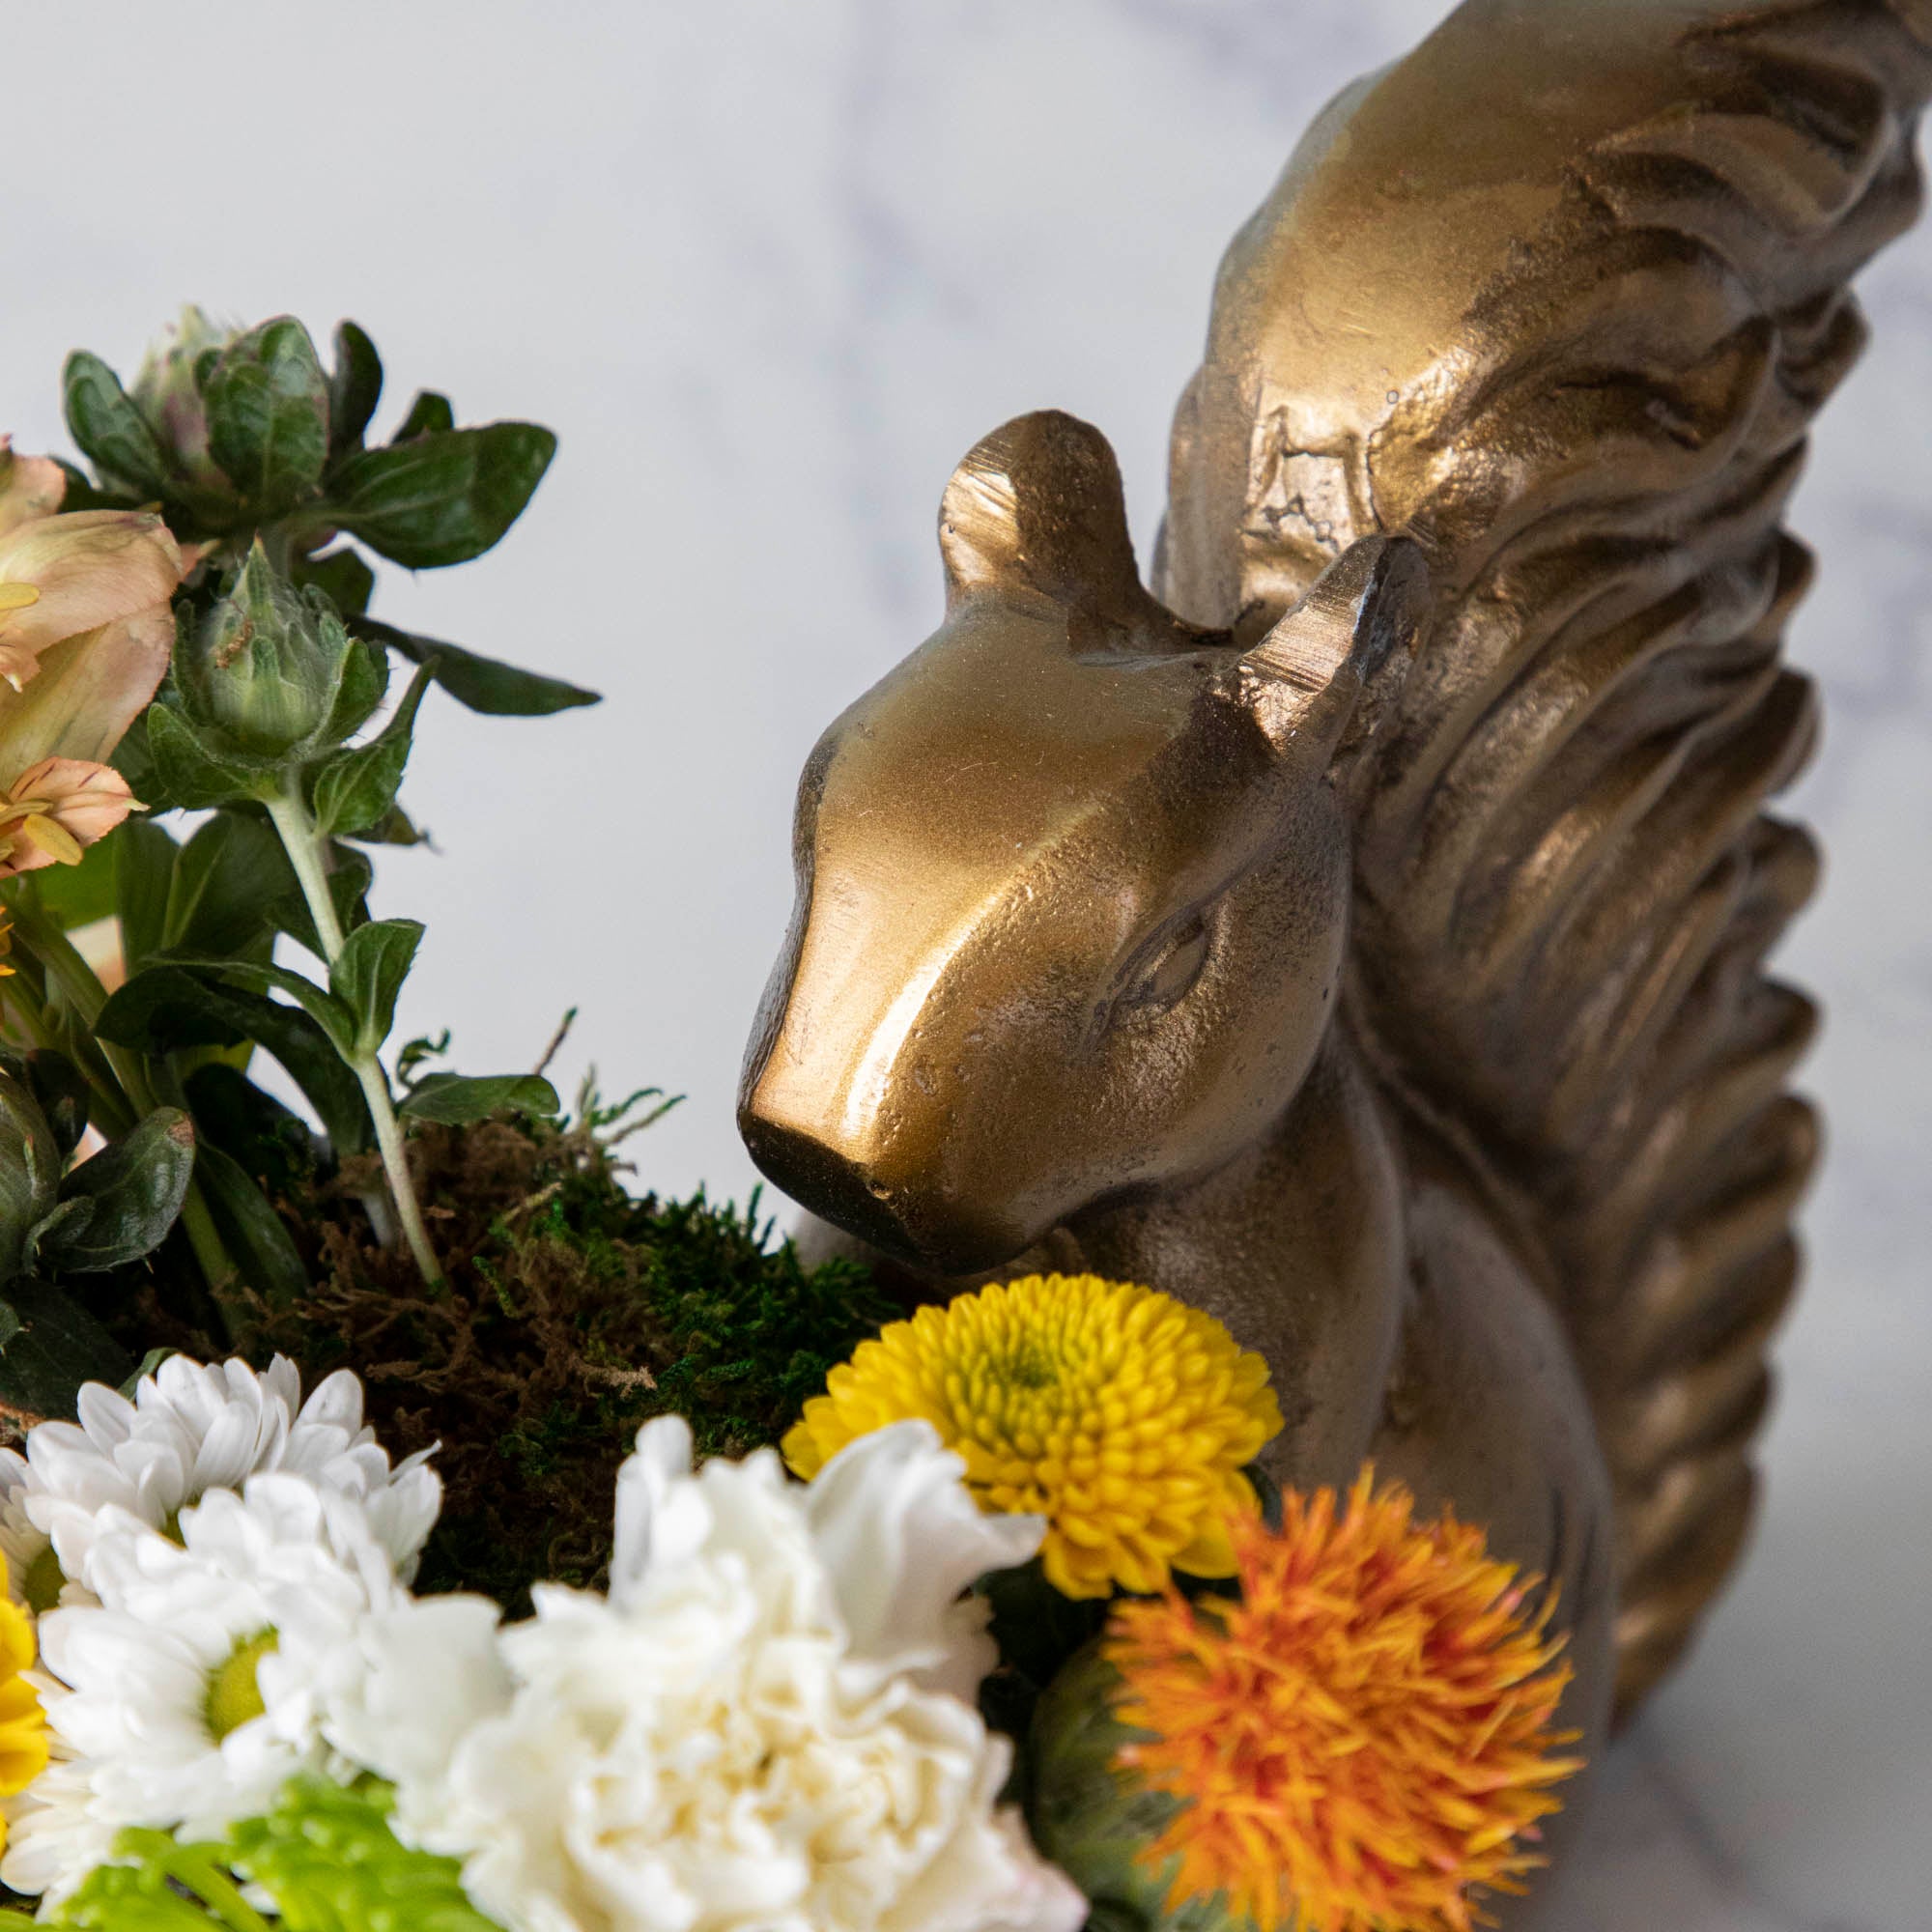 A bronze Accent Decor squirrel holding a bowl of moss.